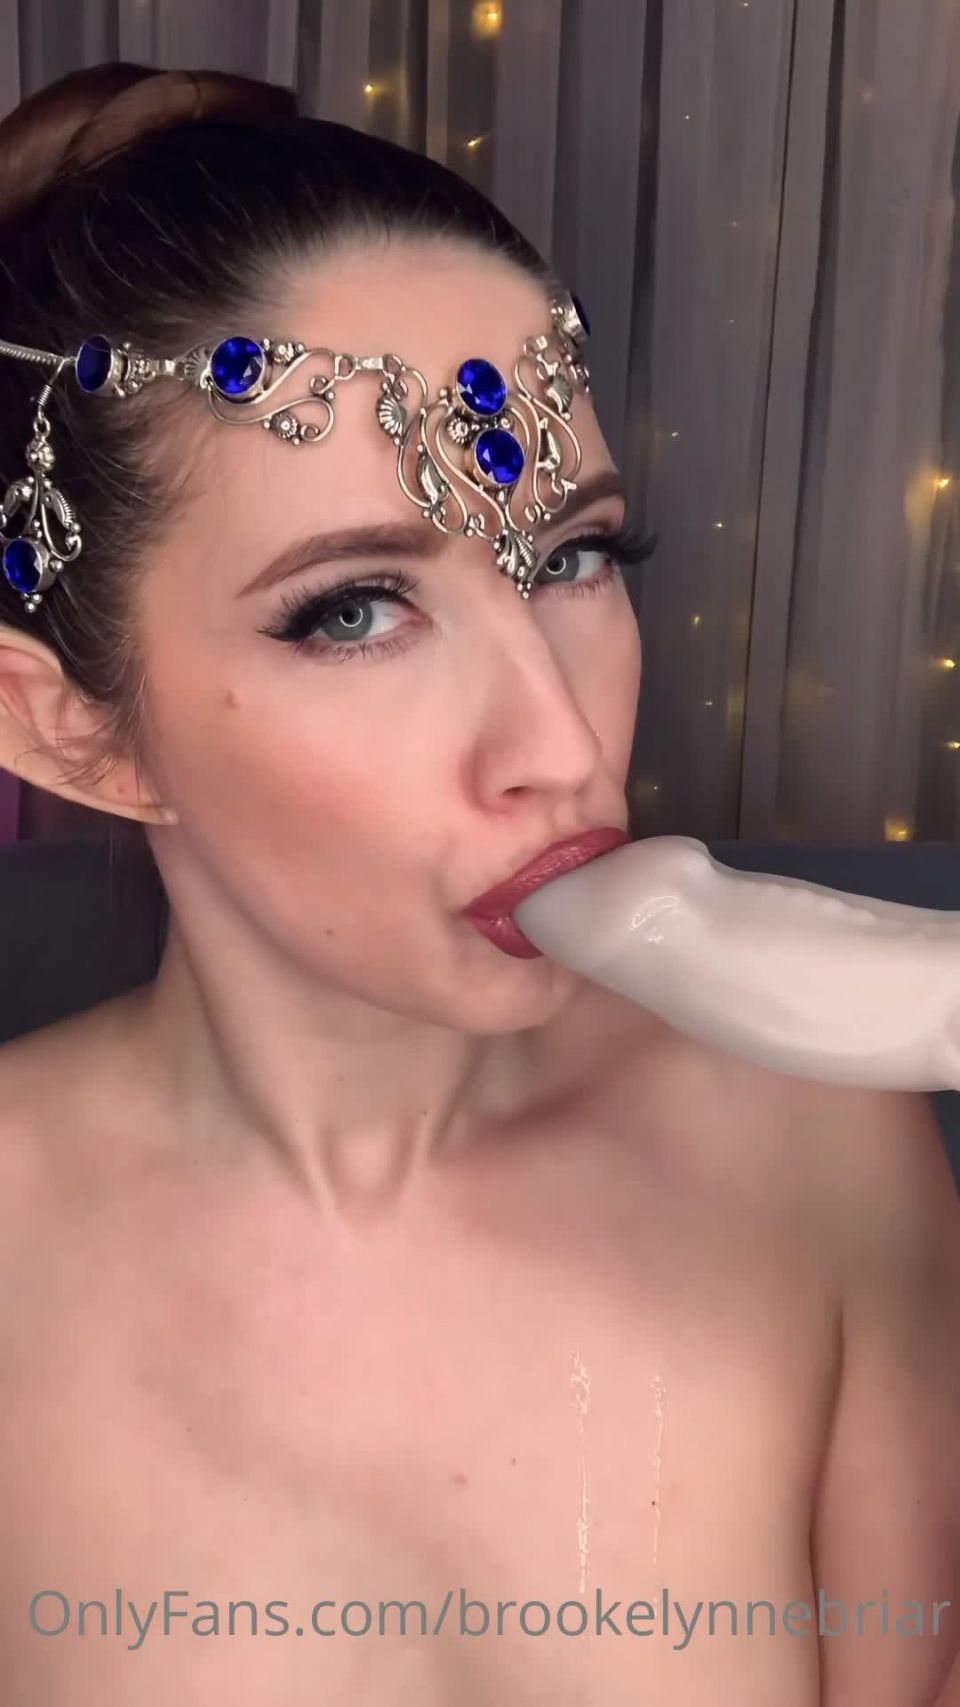 Onlyfans - BrookelynneBriar - Jerk While The Queen Fucks You are unworthy of fucking the Queen - 13-03-2021